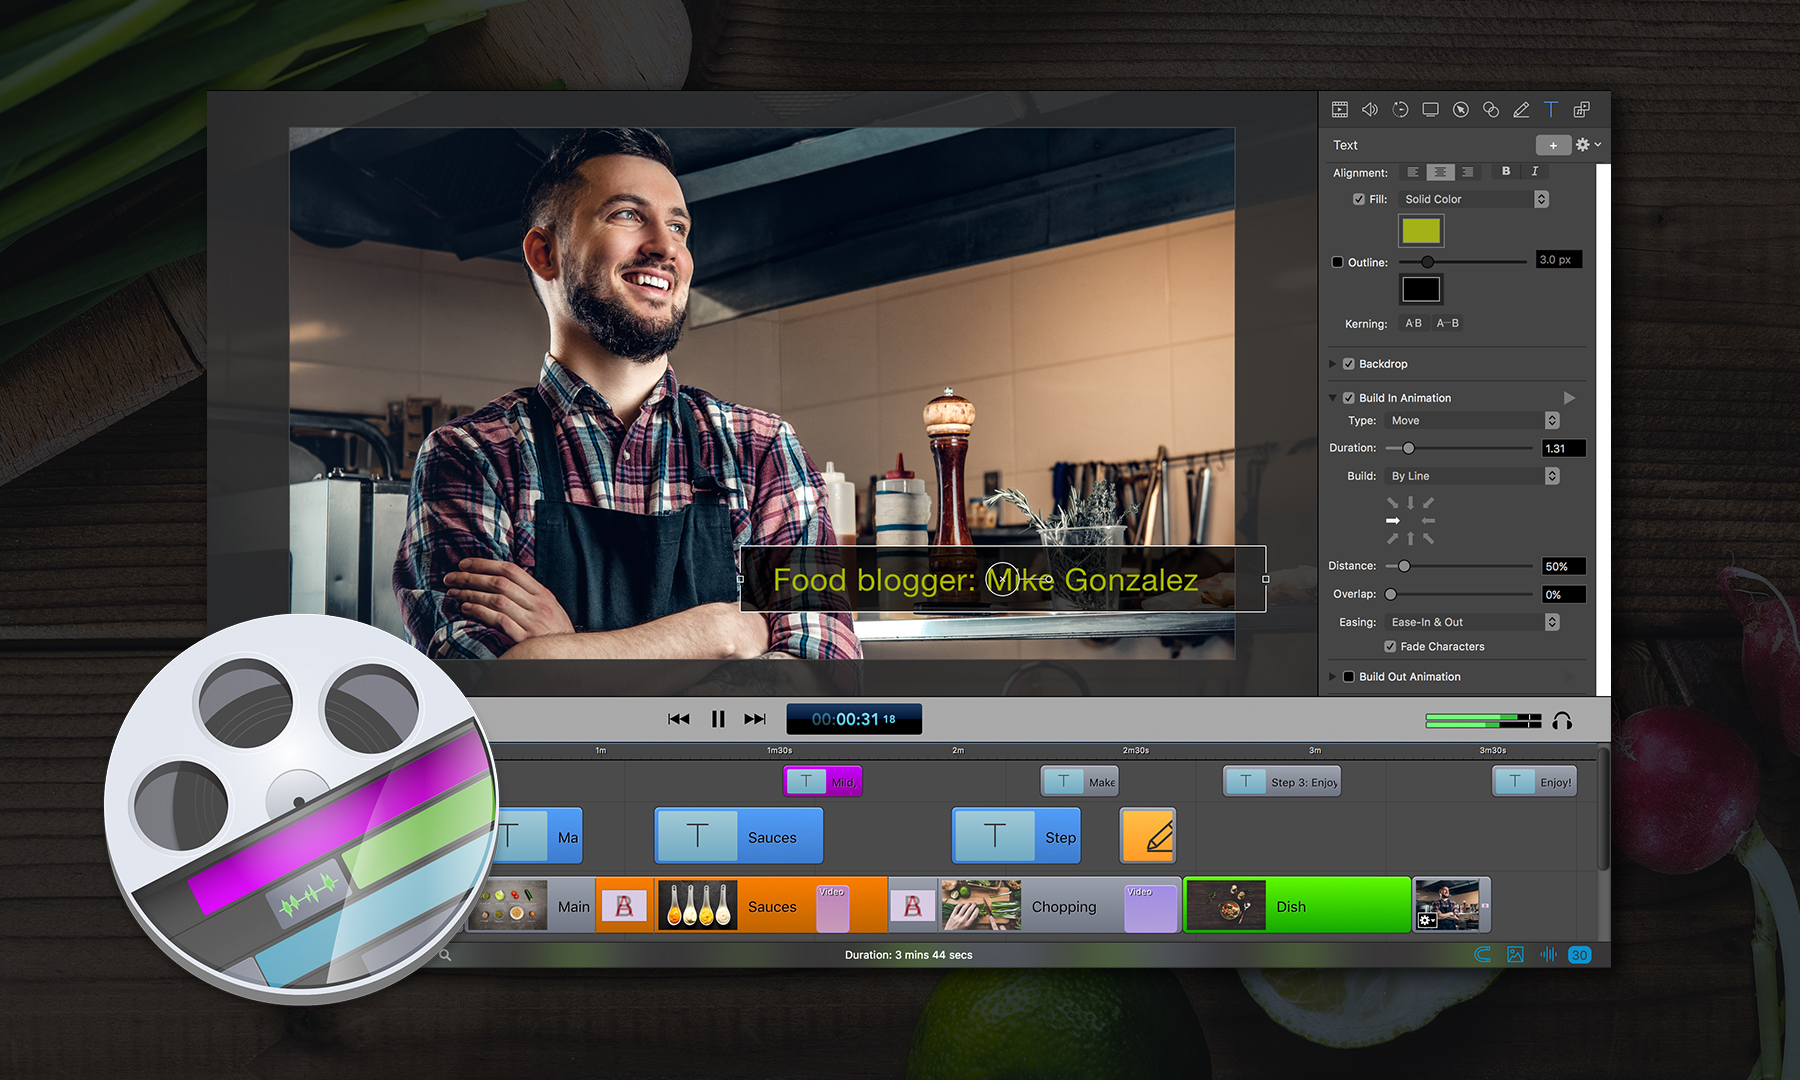 Telestream Announces ScreenFlow 7.0 Video Editing and Screen Recording Software for Mac - August 1, 2017 - Telestream Press Release